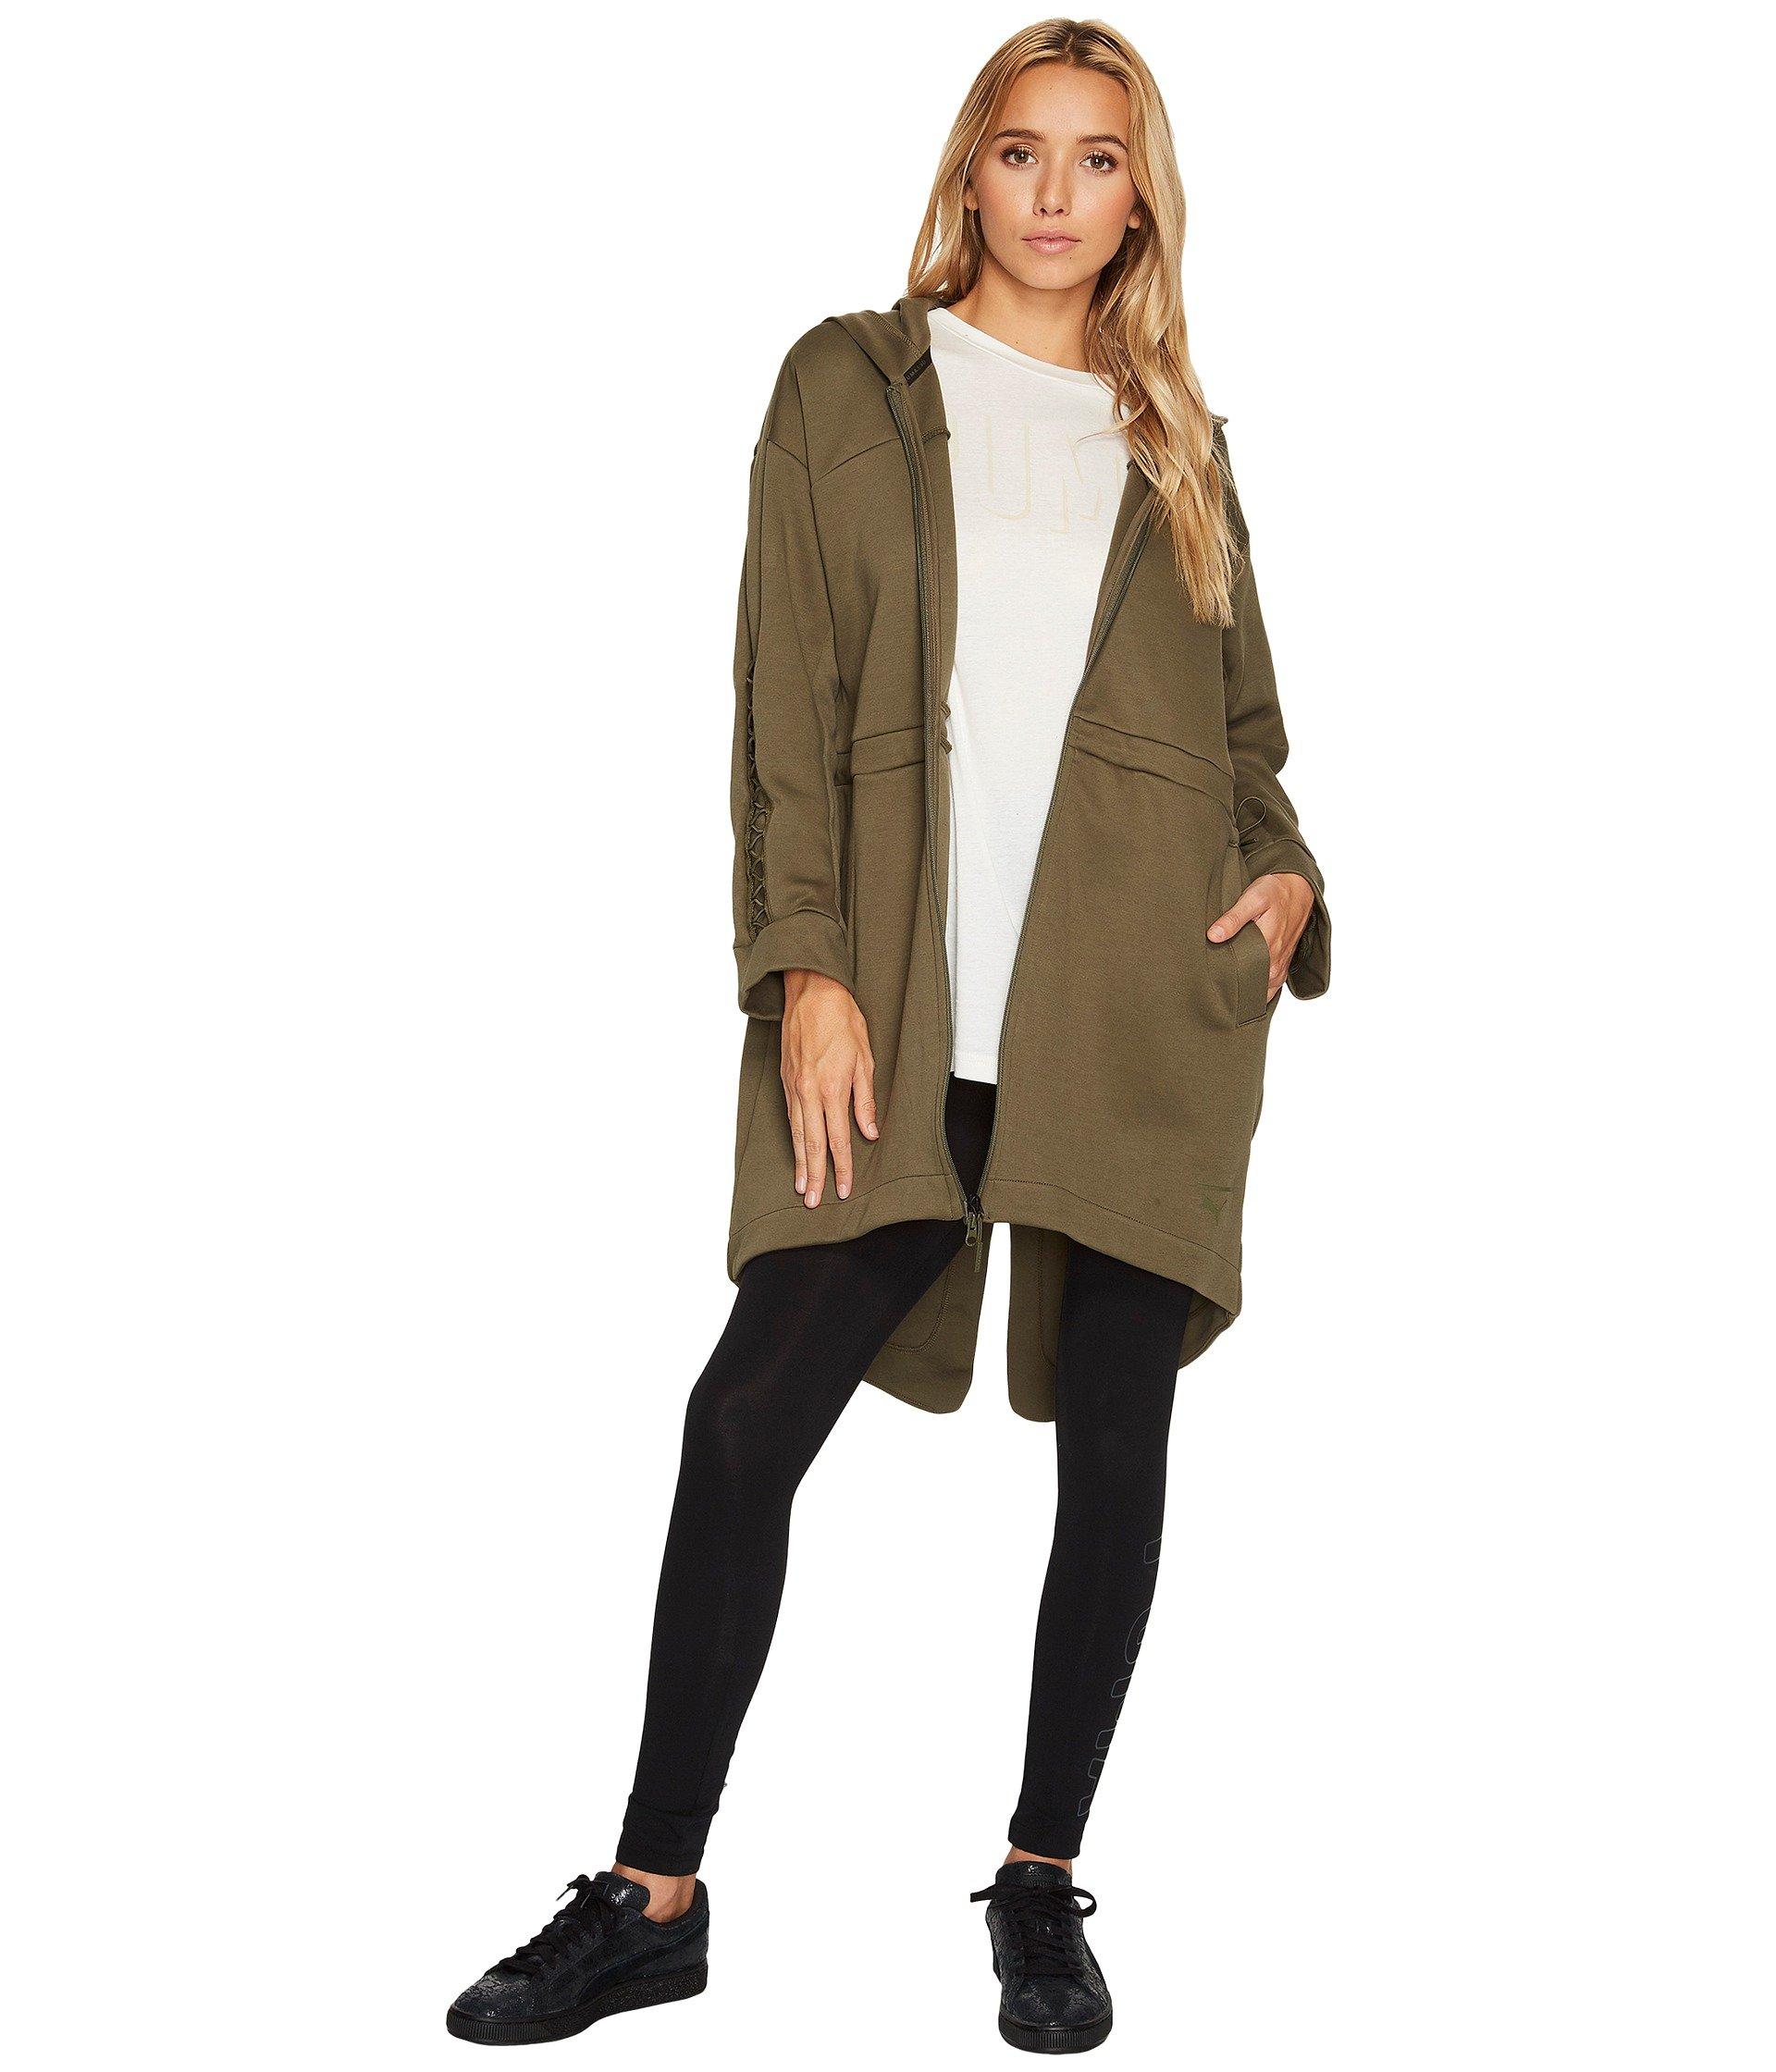 Lacing Midlayer Jacket In Olive Night 